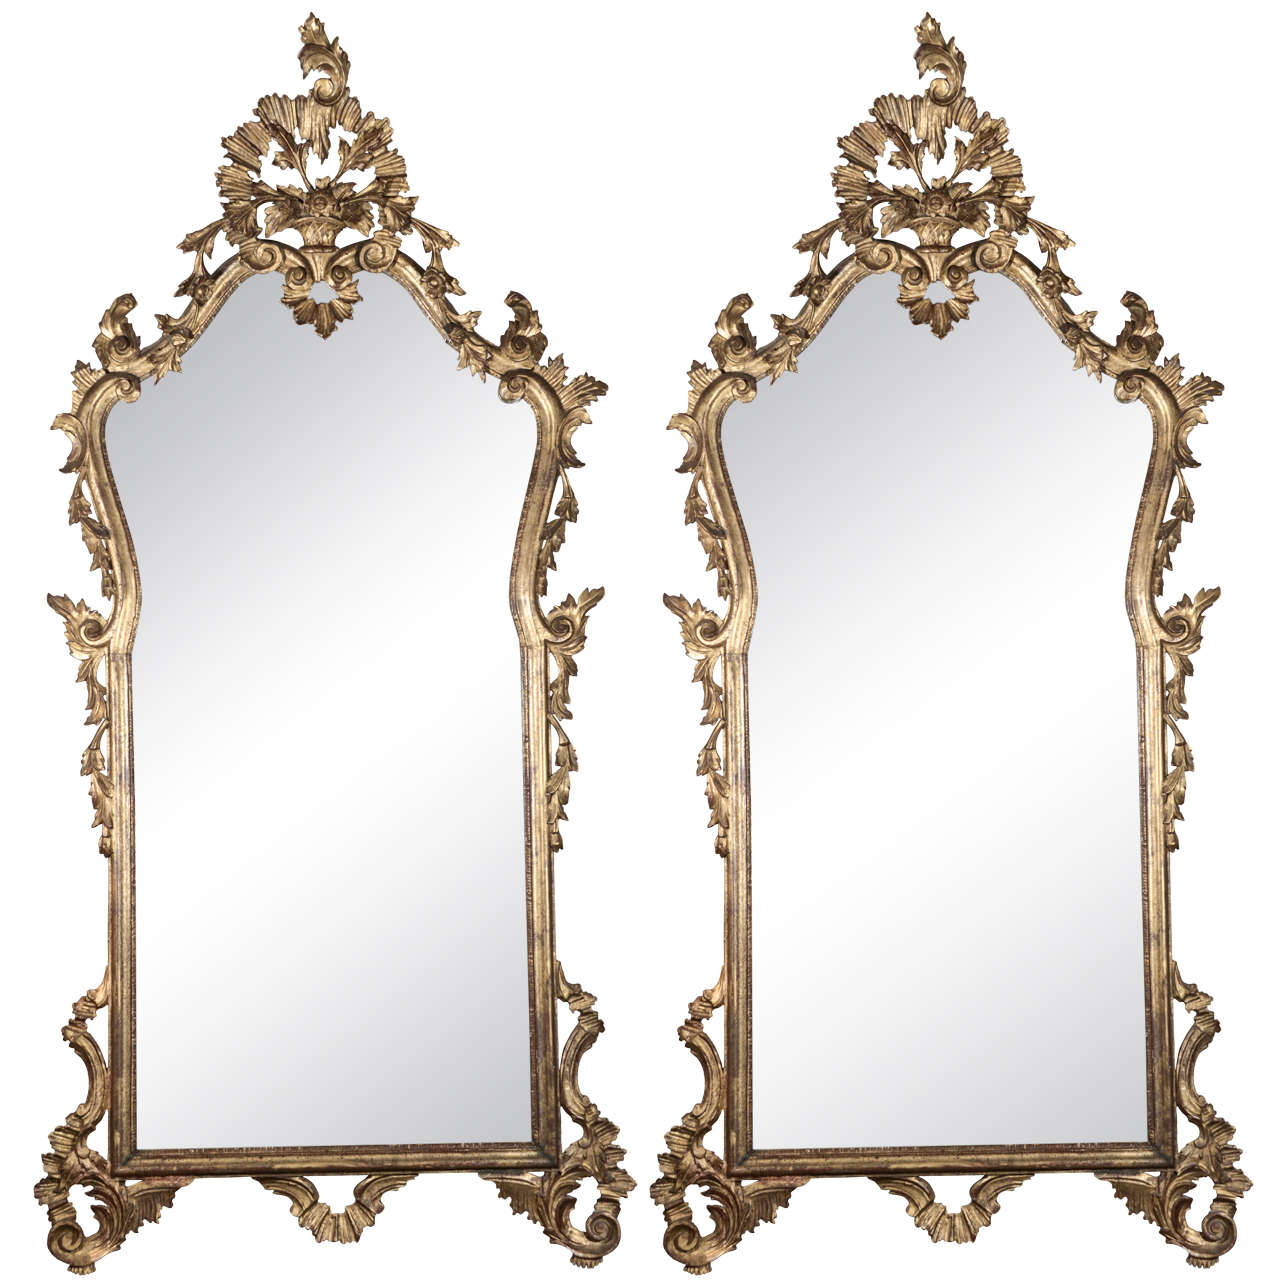 Late 19th c Italian Louis XV gilt wood carved mirrors